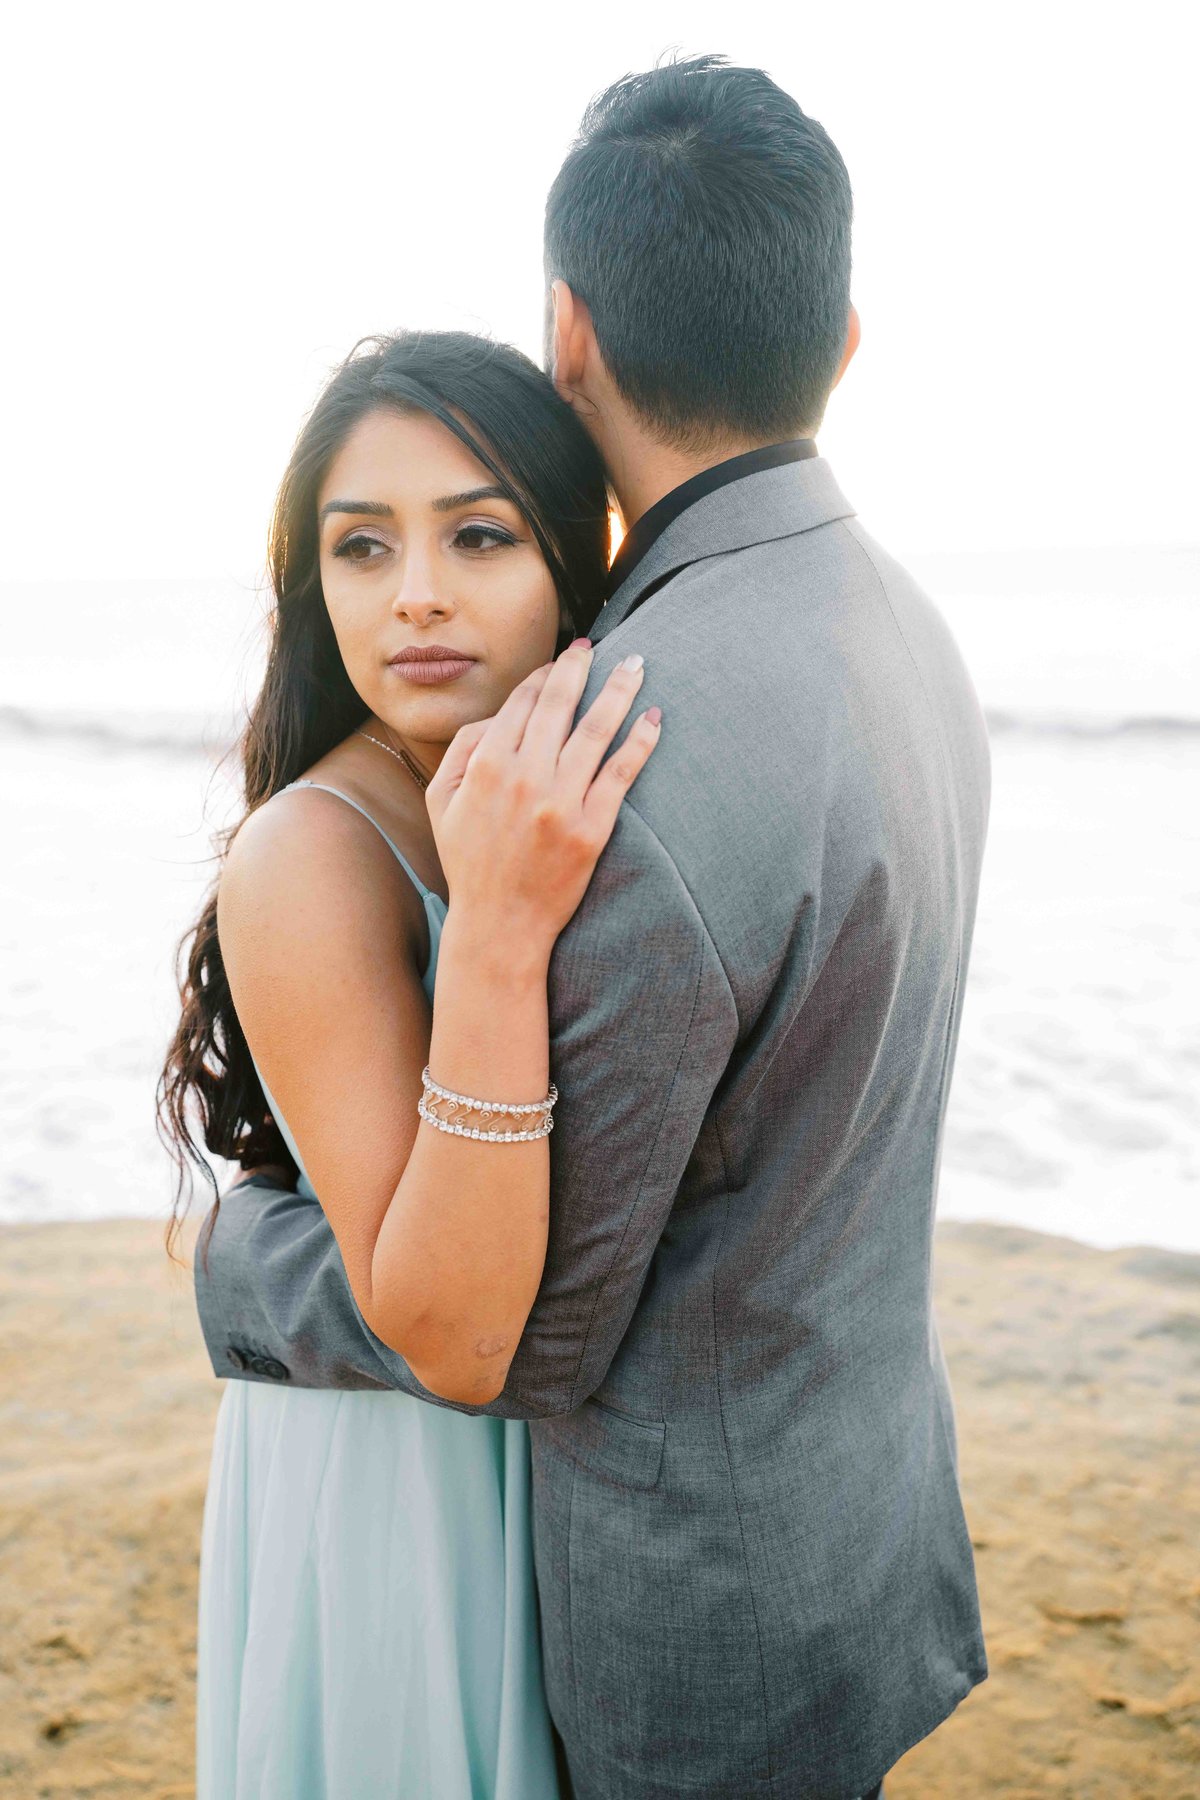 Babsie-Ly-Photography-San-Diego-Proposal-Engagement-Sunset-Cliffs-Indian-Couple-Dog-Surprise-004